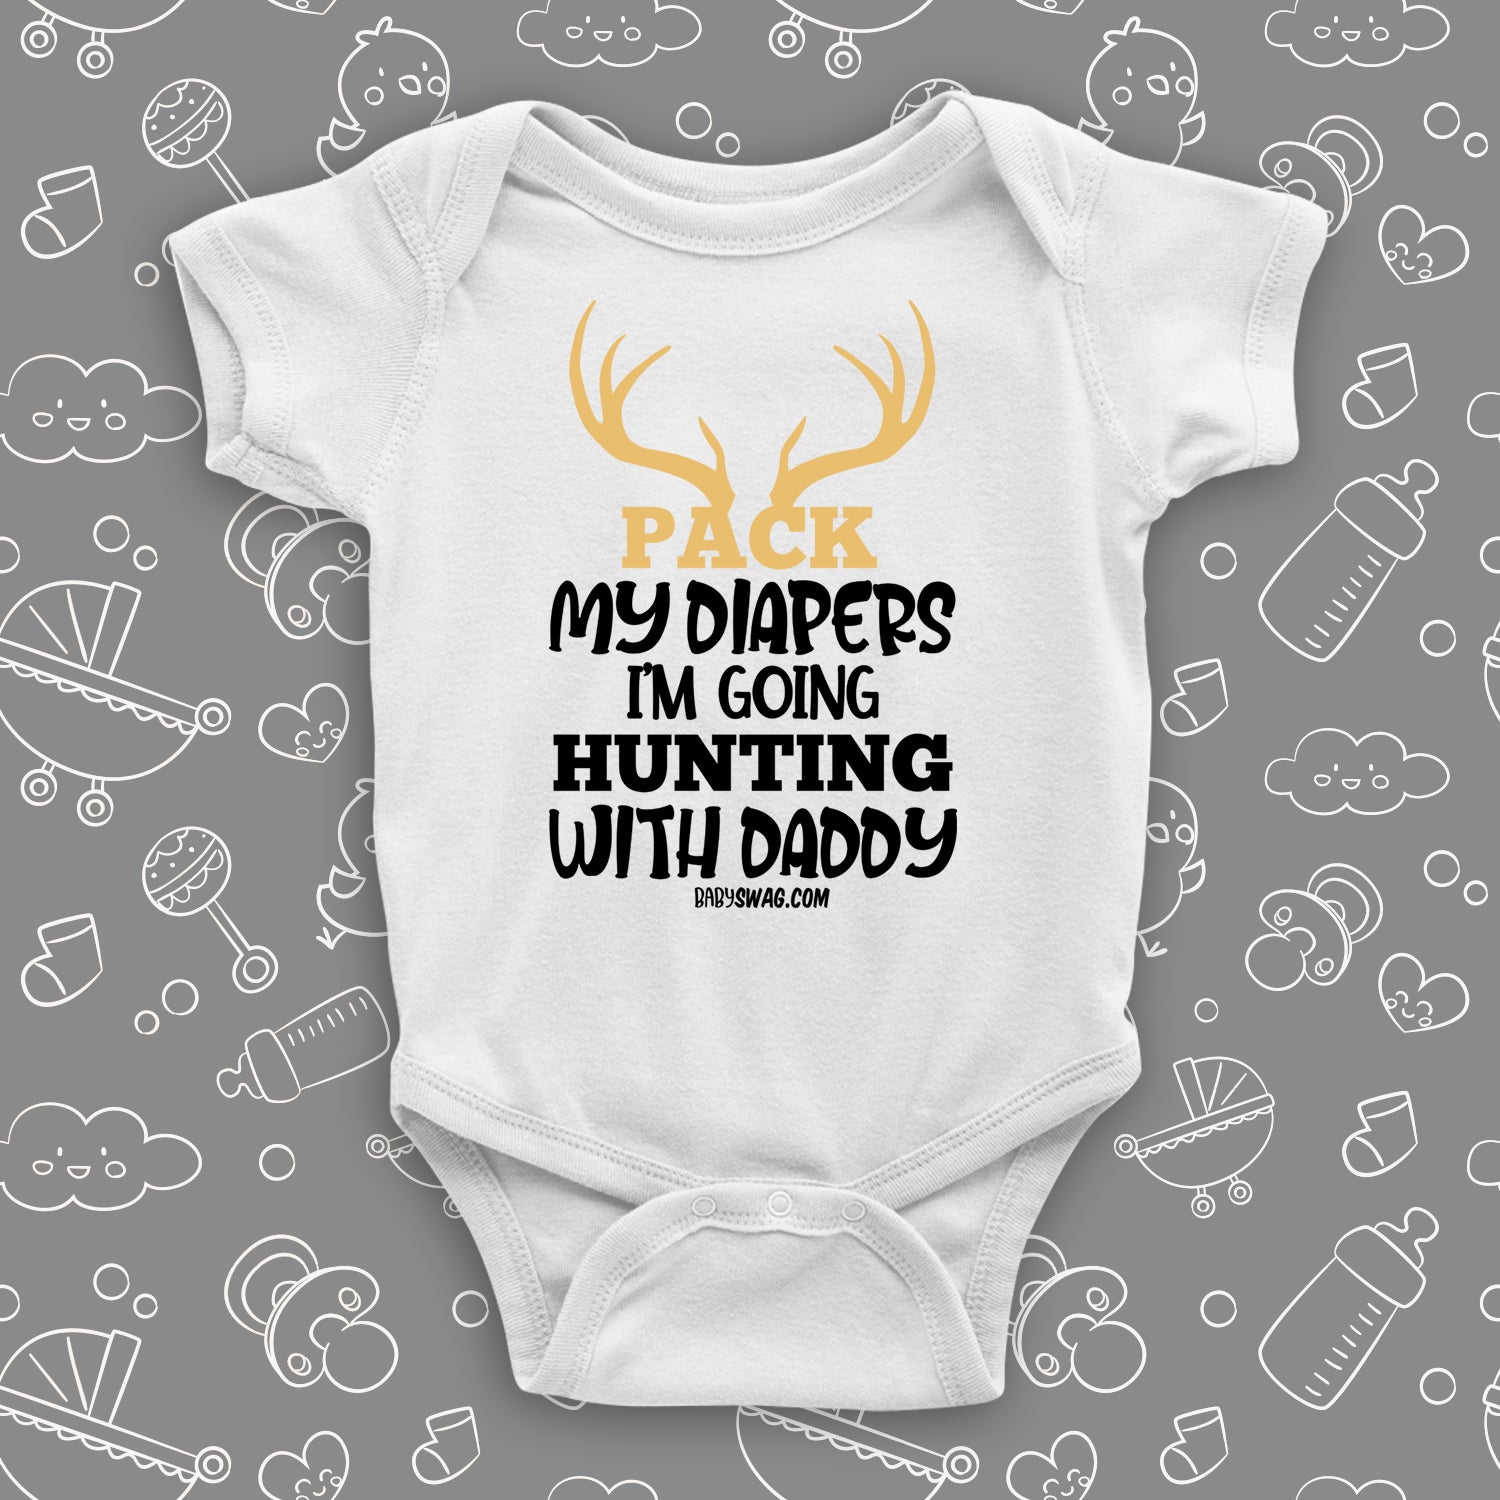 Pack My Diapers I'm Going Hunting with Daddy | Baby Swag 18/24 Months / Heather Gray